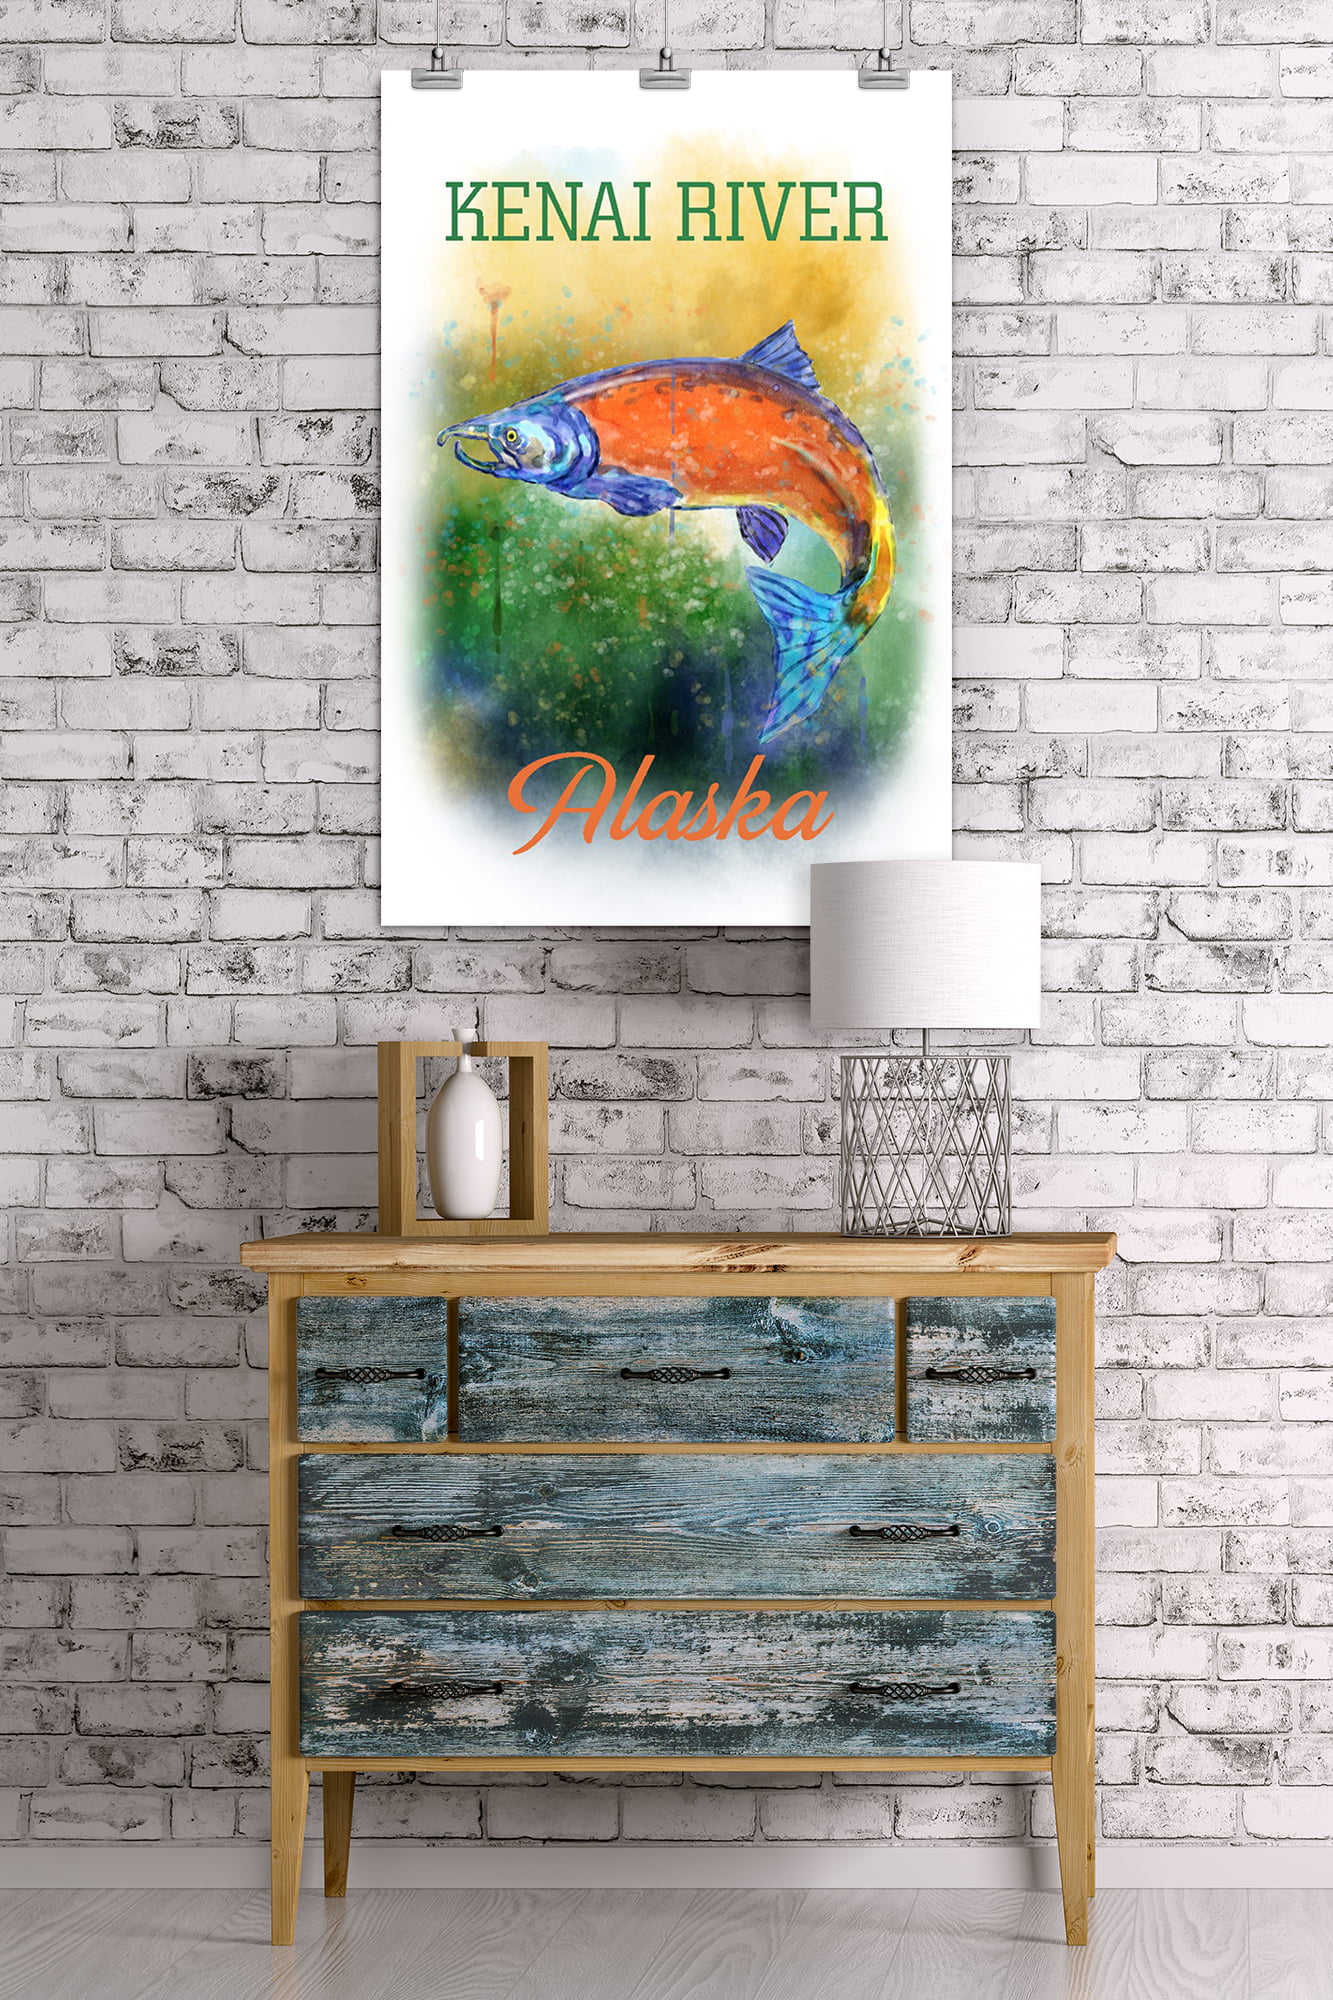 Gill Netters Best Salmon Case Label (24x36 Giclee Gallery Art Print, Vivid  Textured Wall Decor) 